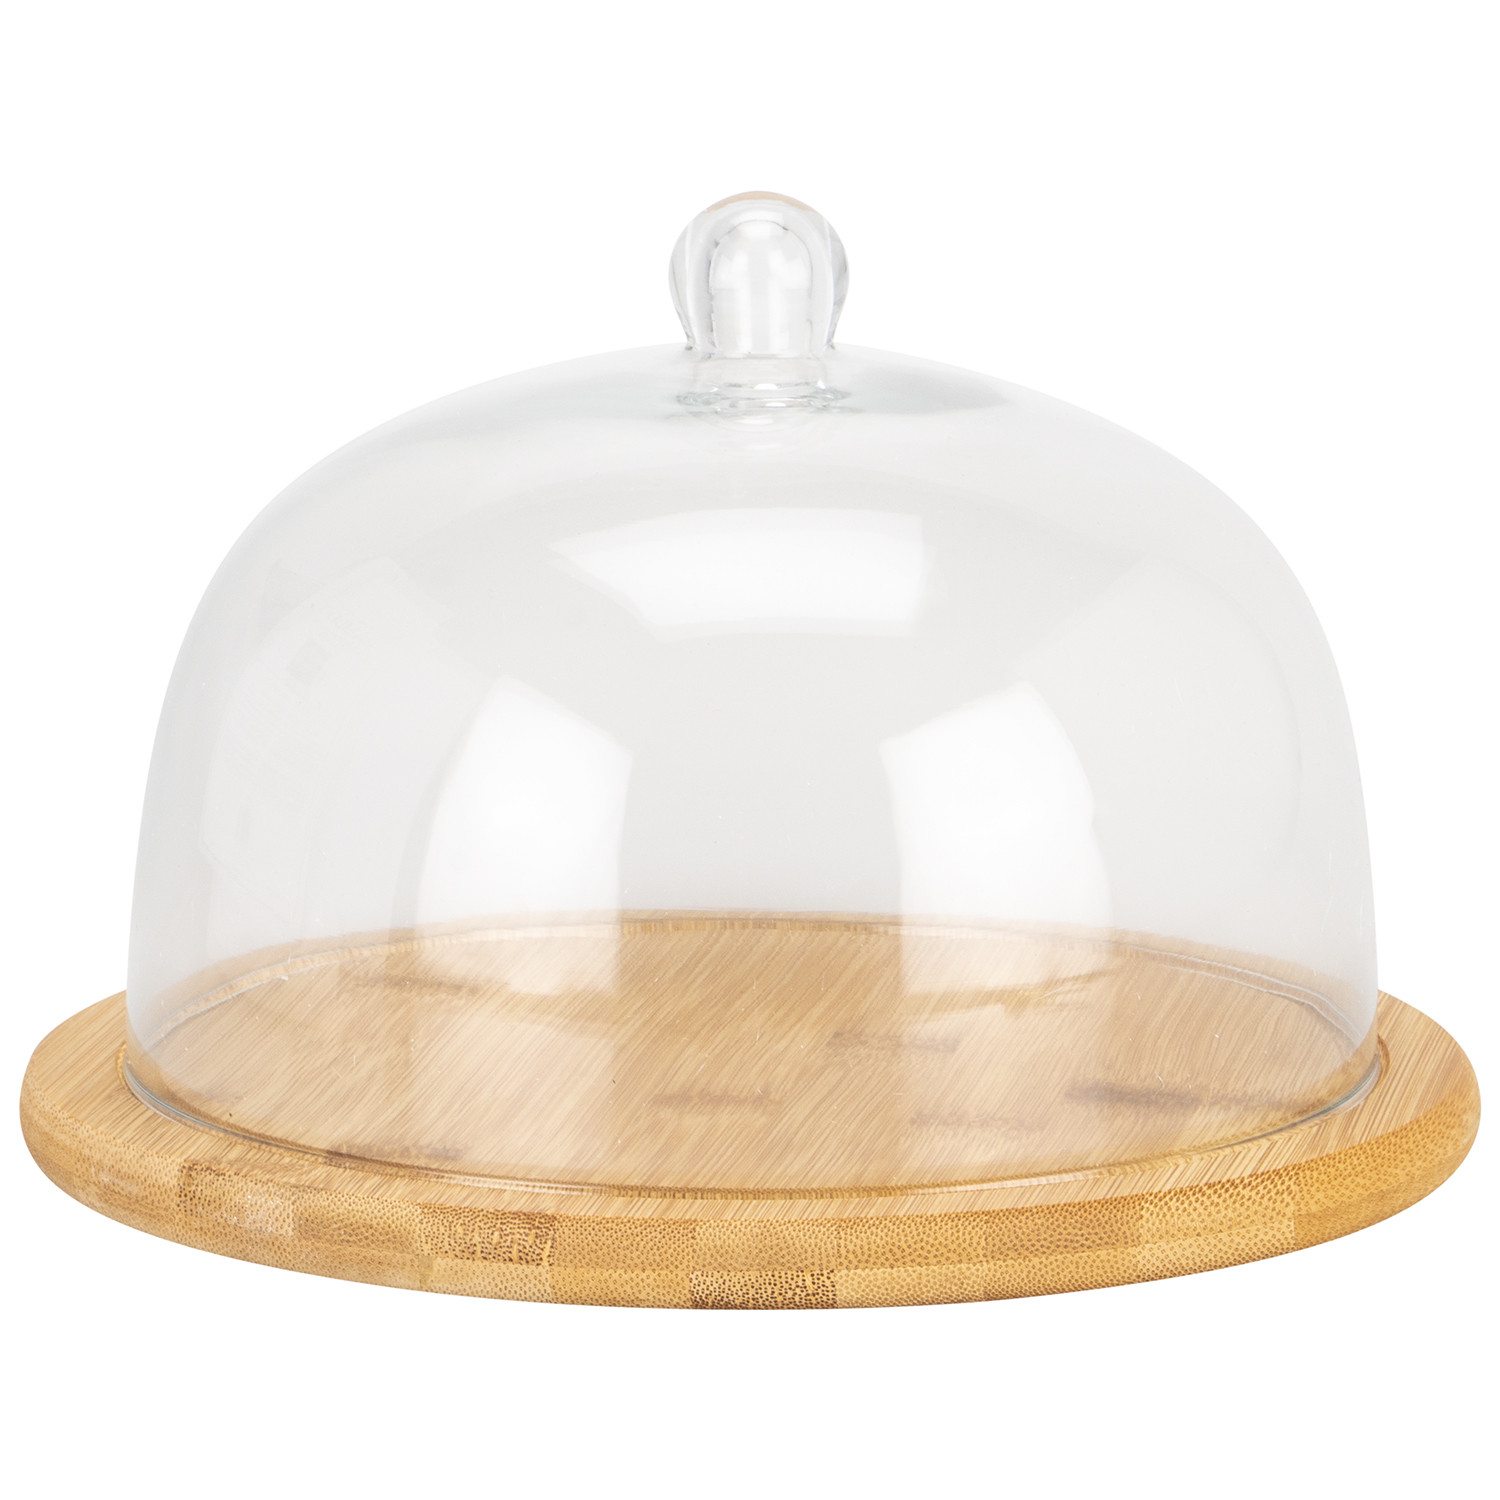 Bamboo Cheese Board with Glass Domed Lid Image 1